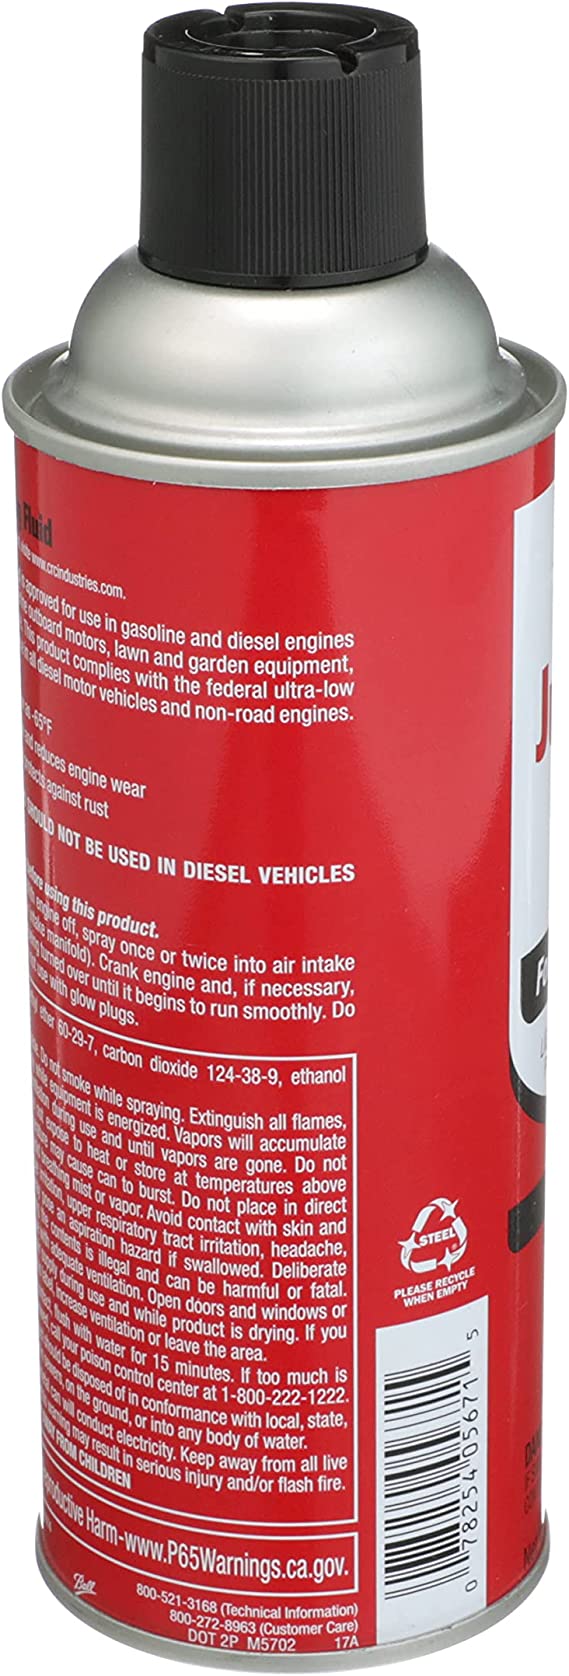 CRC 05671 Jump Start Starting Fluid with Lubricity - 11 Wt Oz.